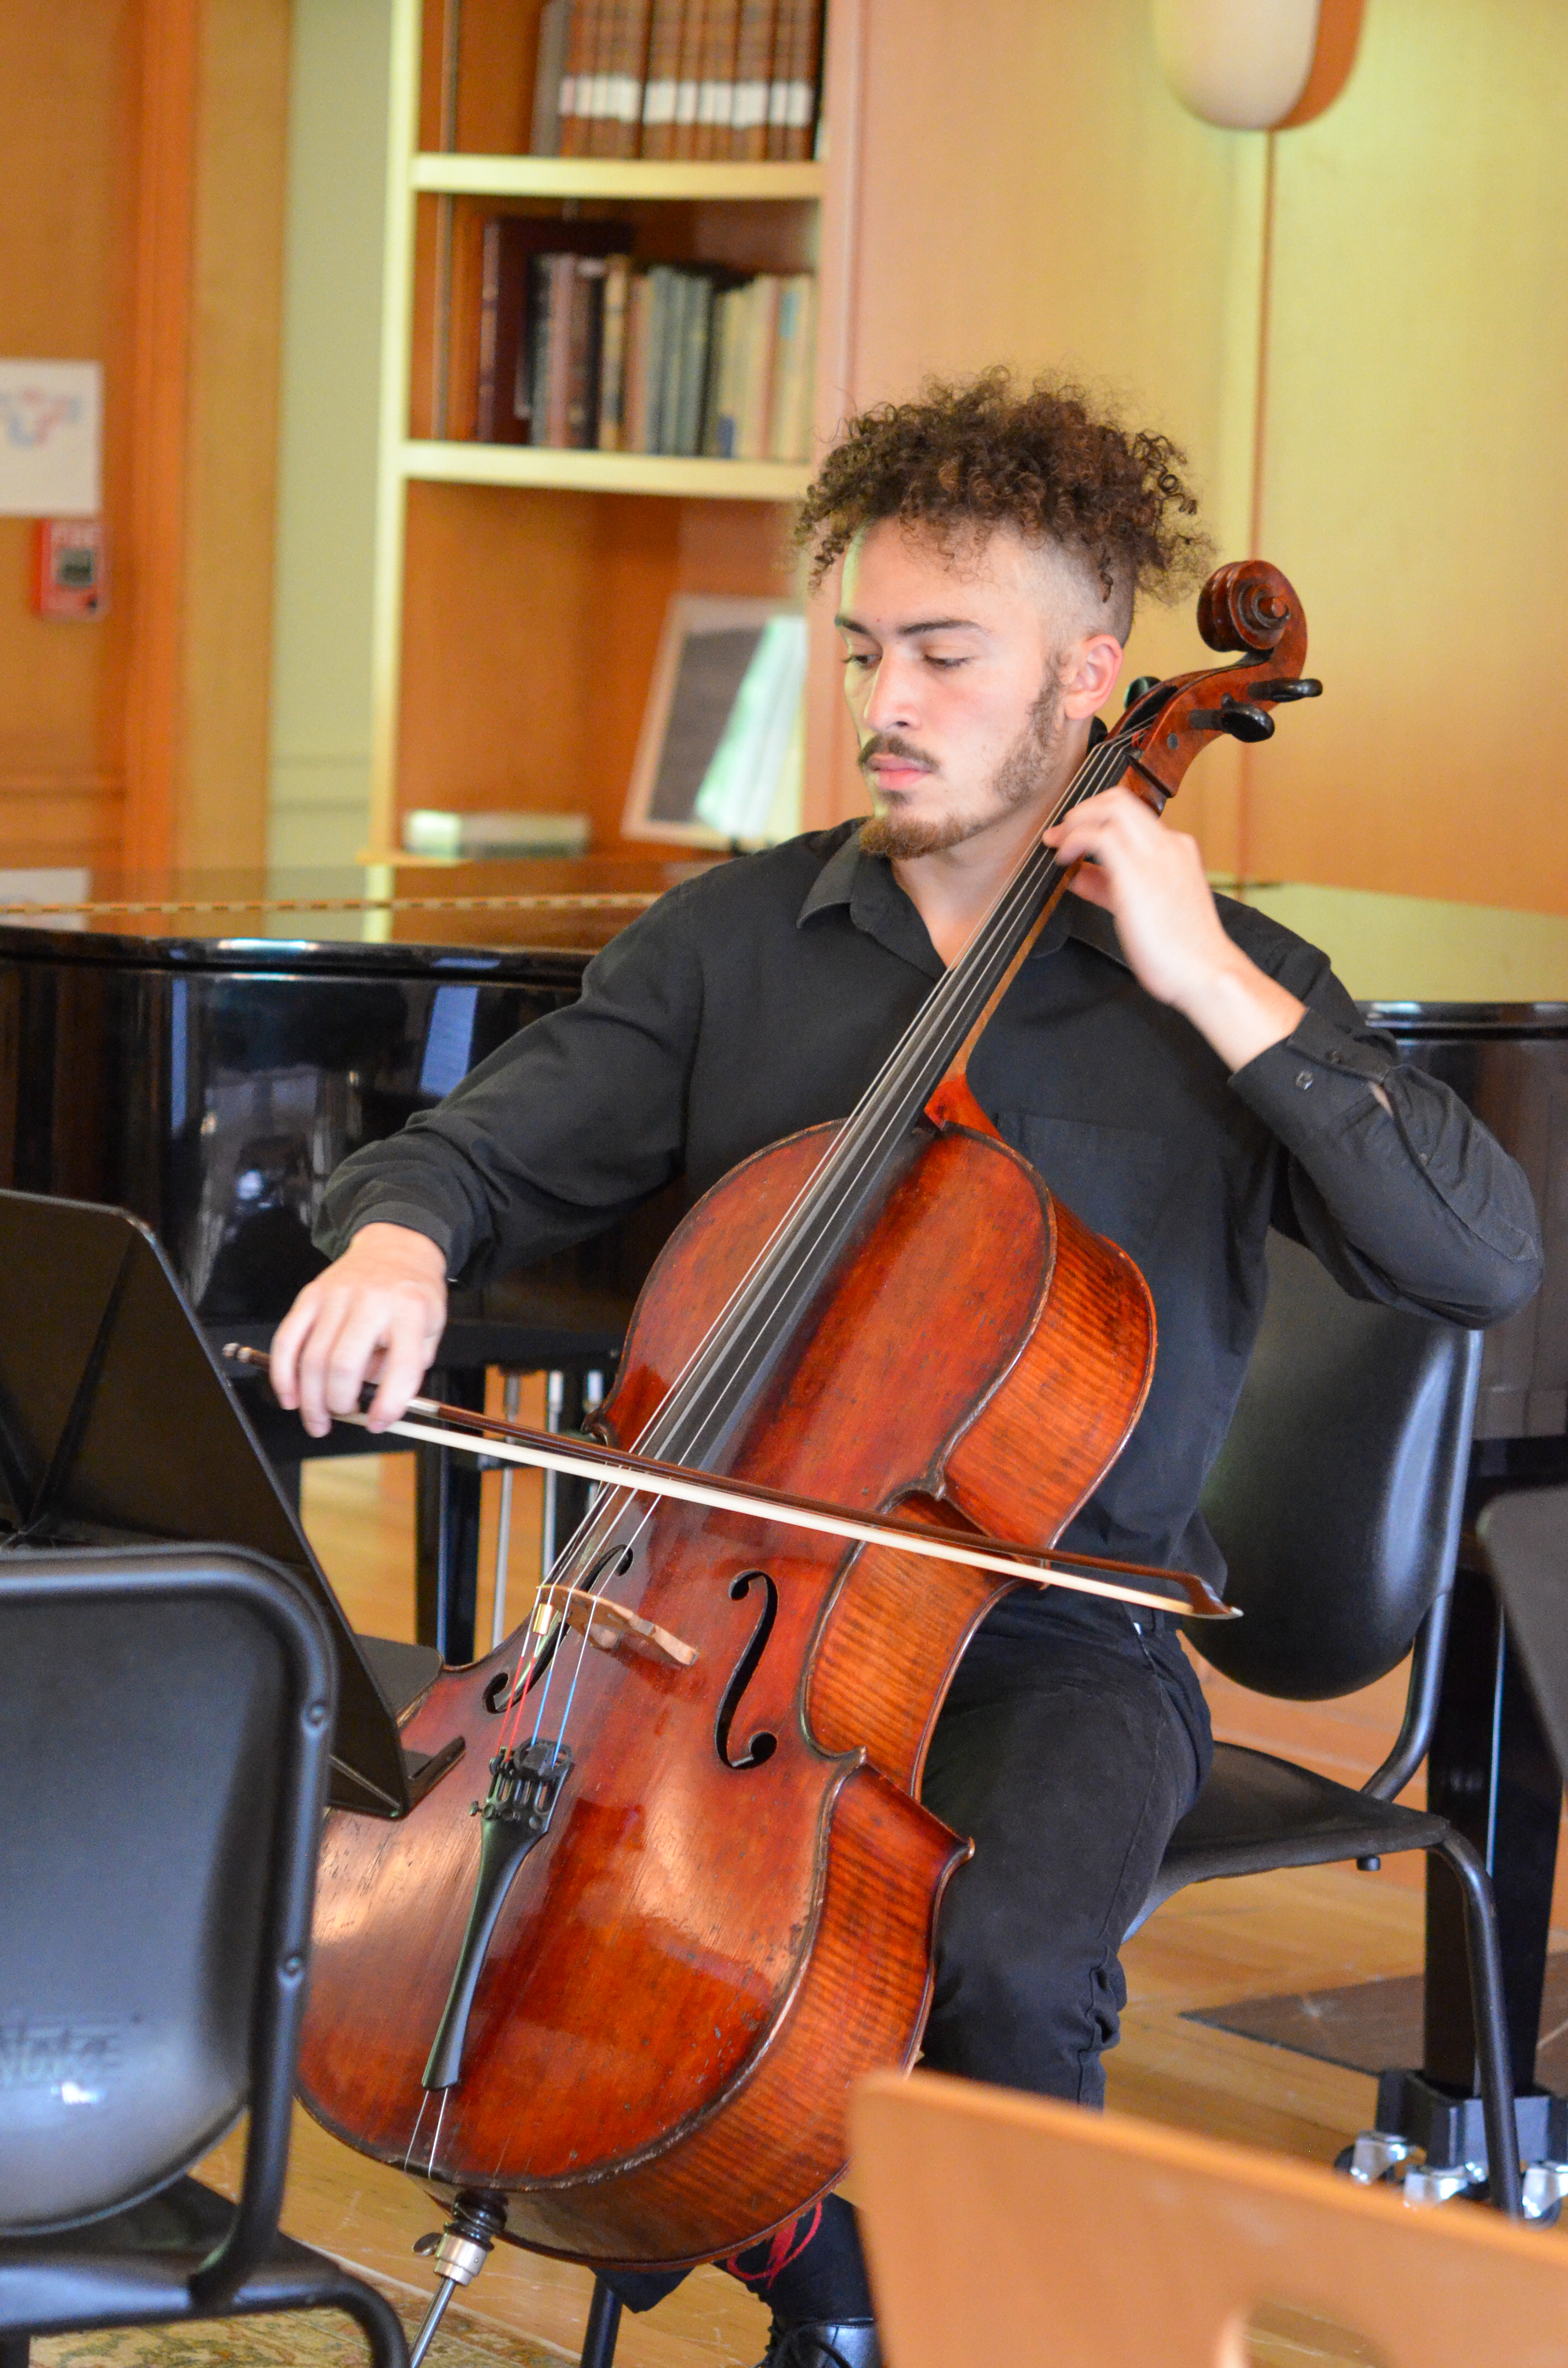 This year's Cove scholarship winner playing the cello as part of his double major.